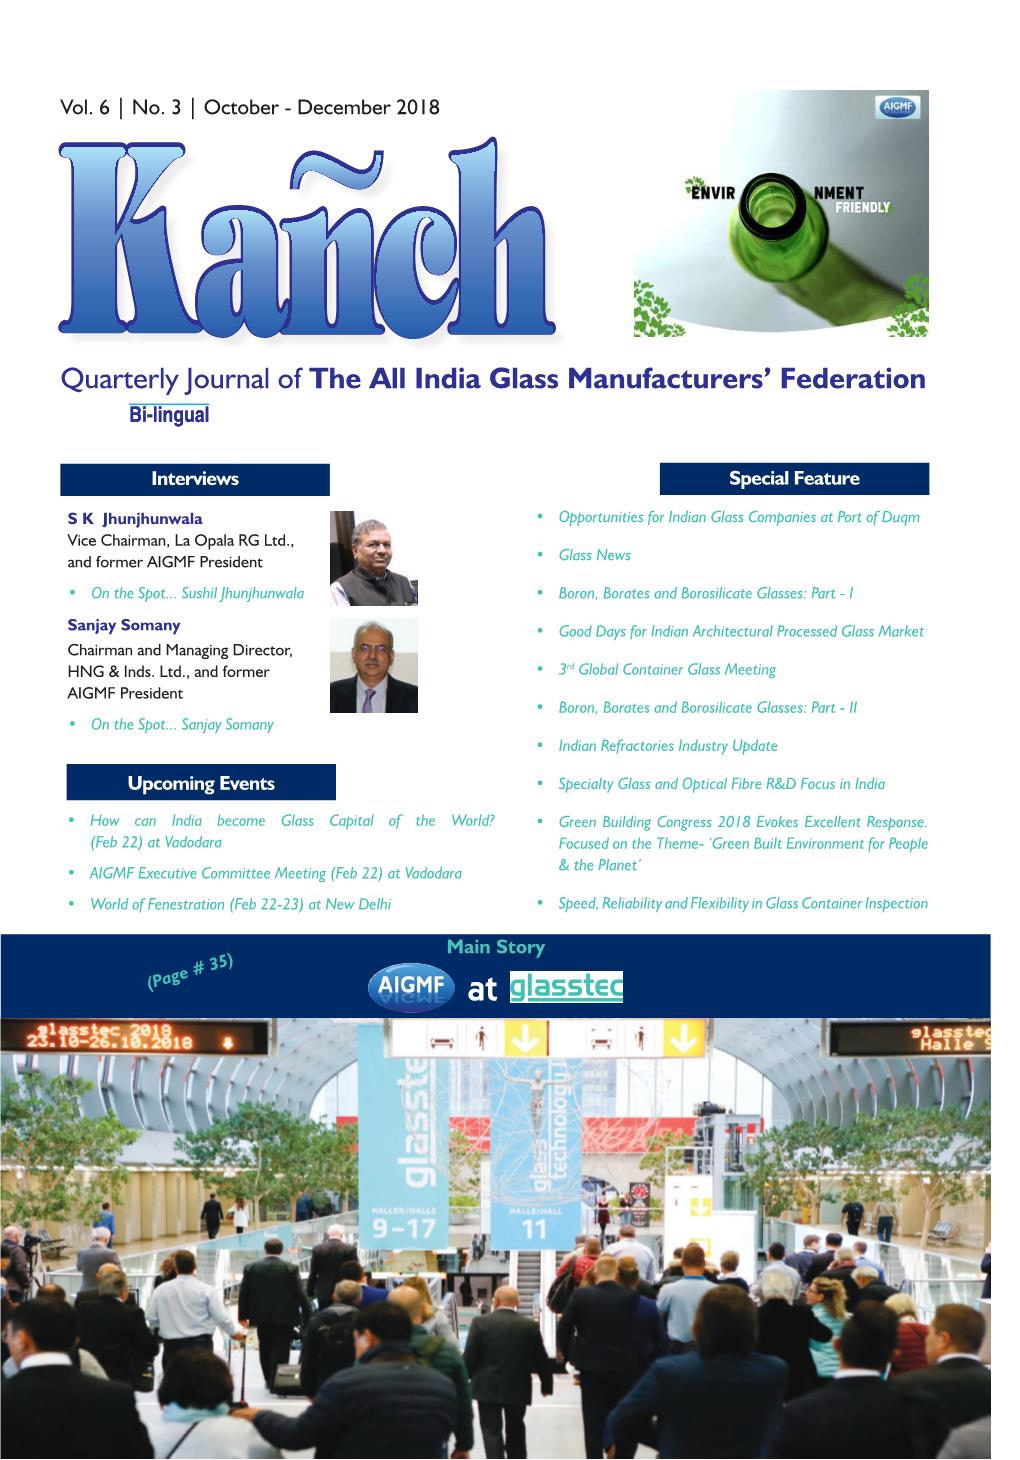 Quarterly Journal of the All India Glass Manufacturers' Federation